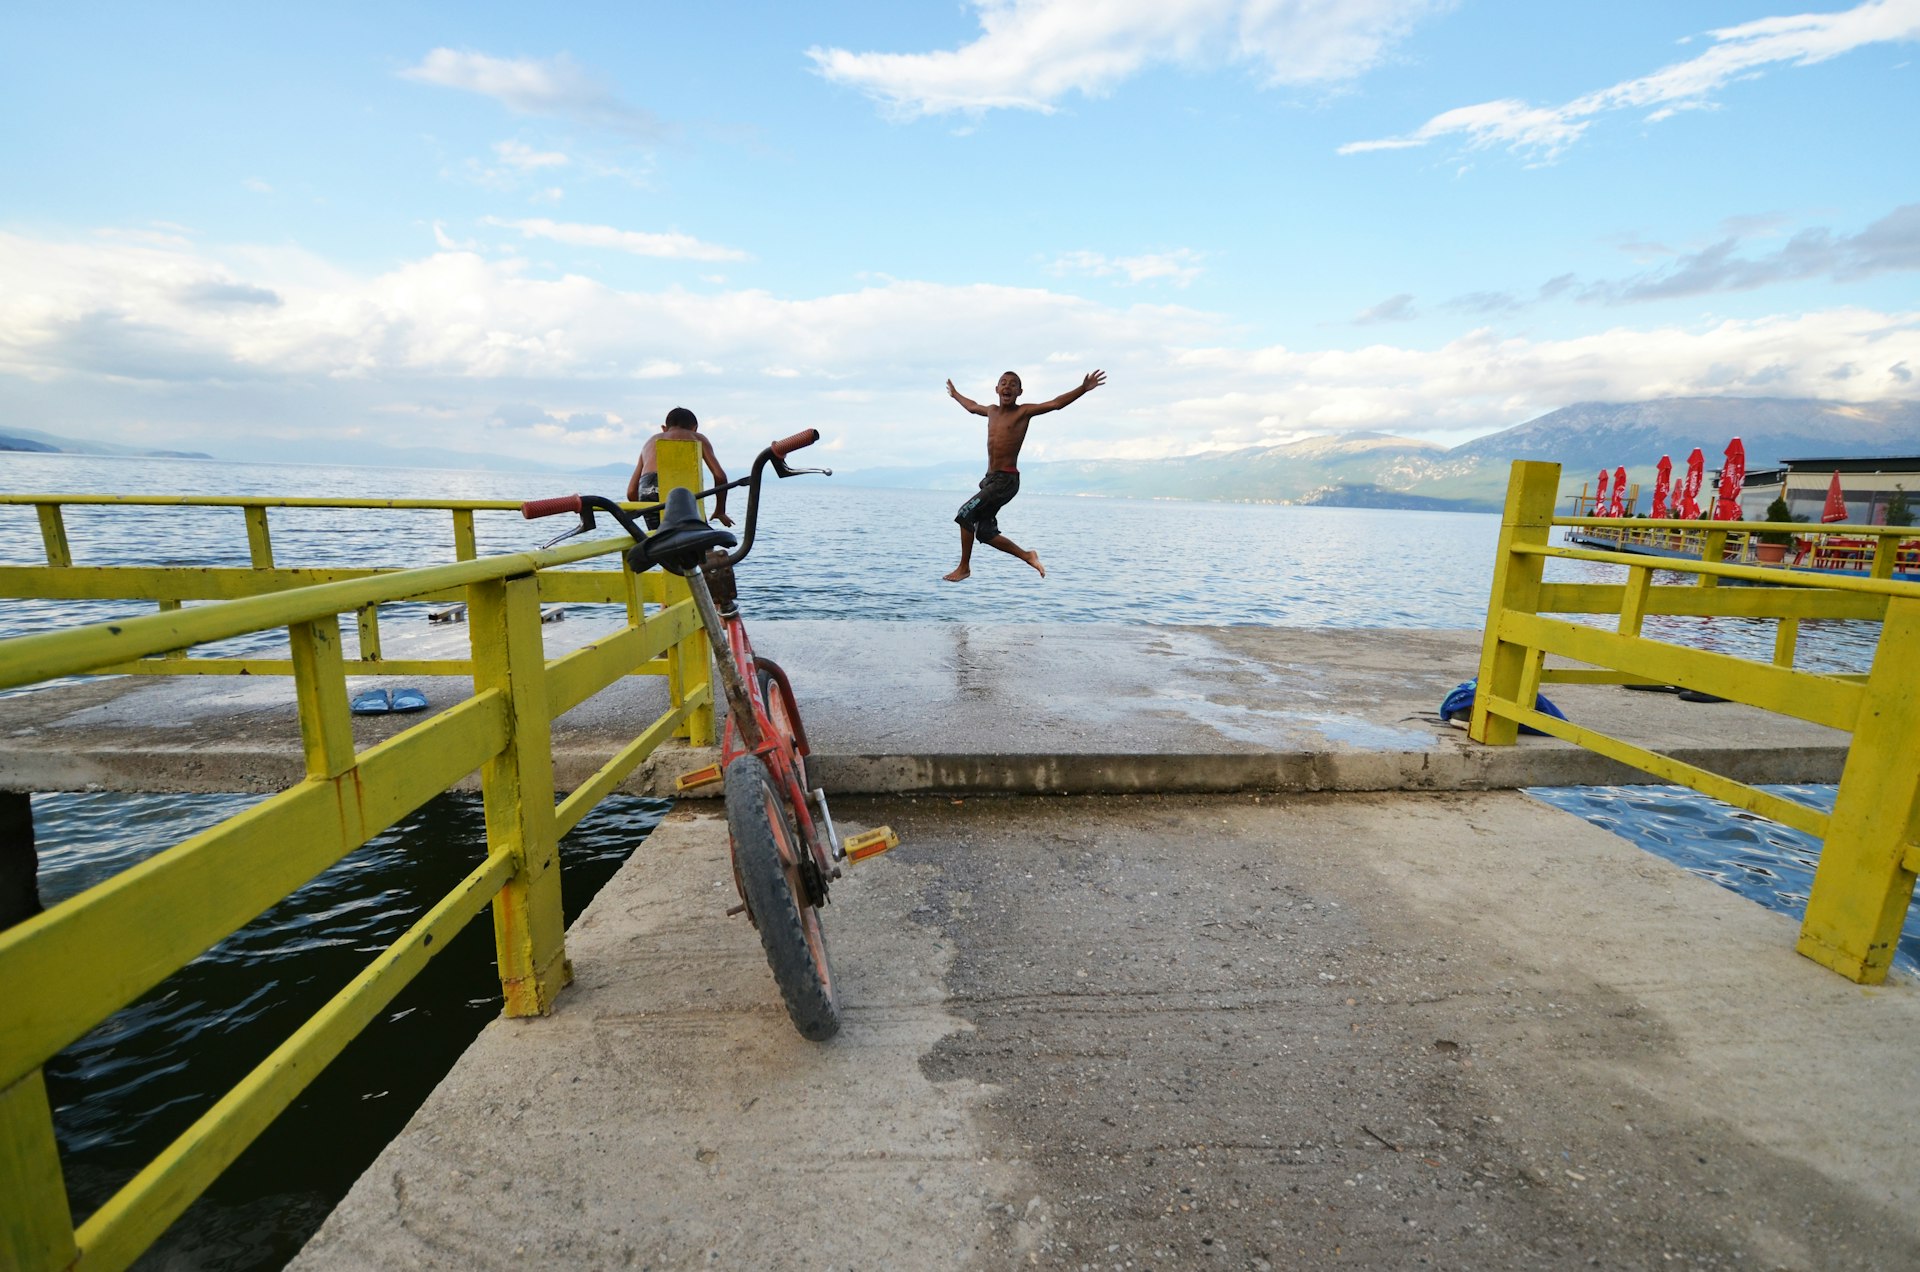 A boy jumps into the water from a pier in a Lake Ohrid, Pogradec, Albania